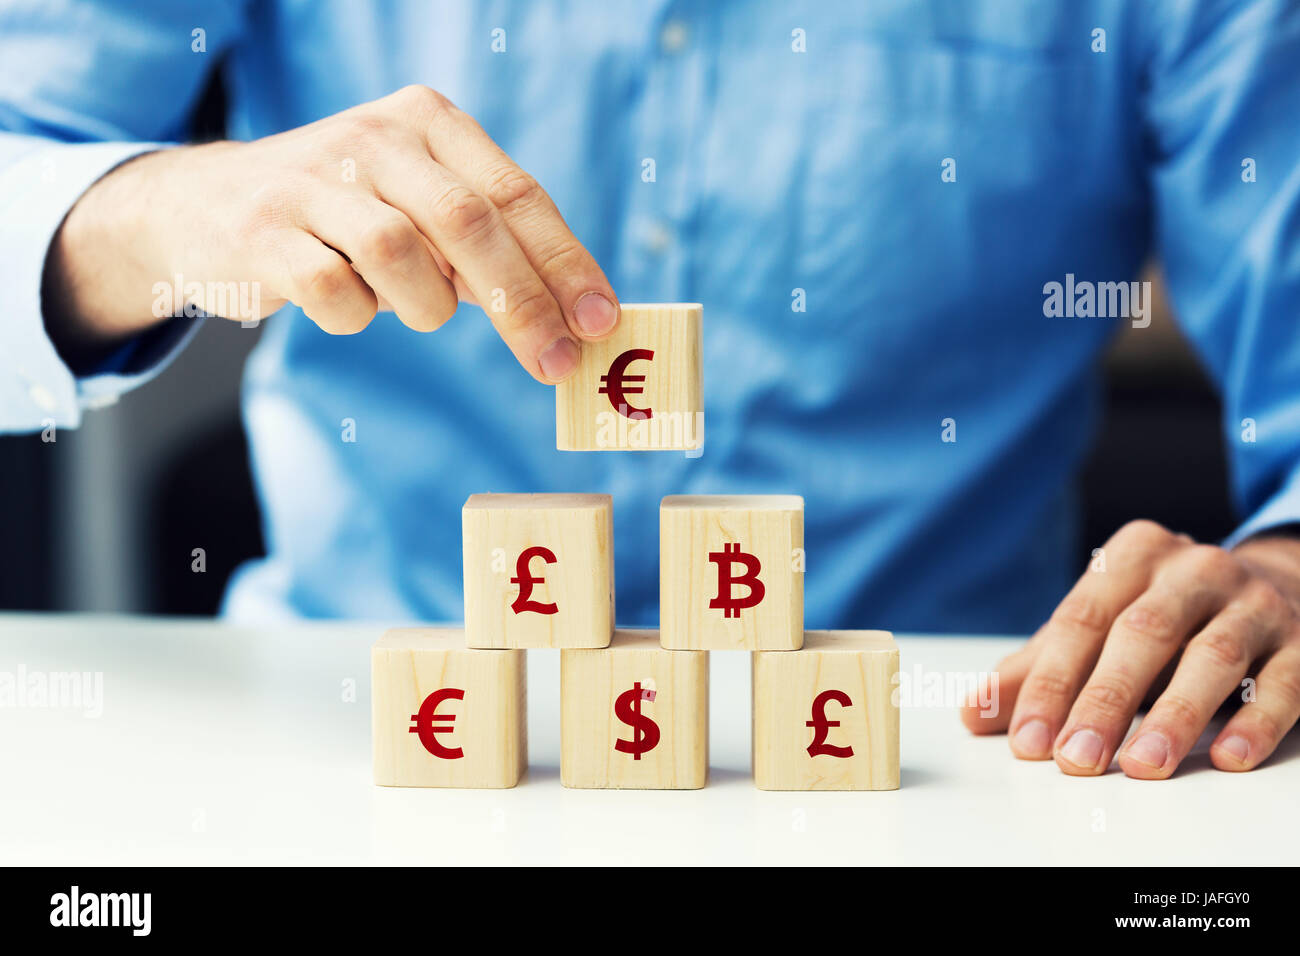 concept of businessman building financial pyramid Stock Photo